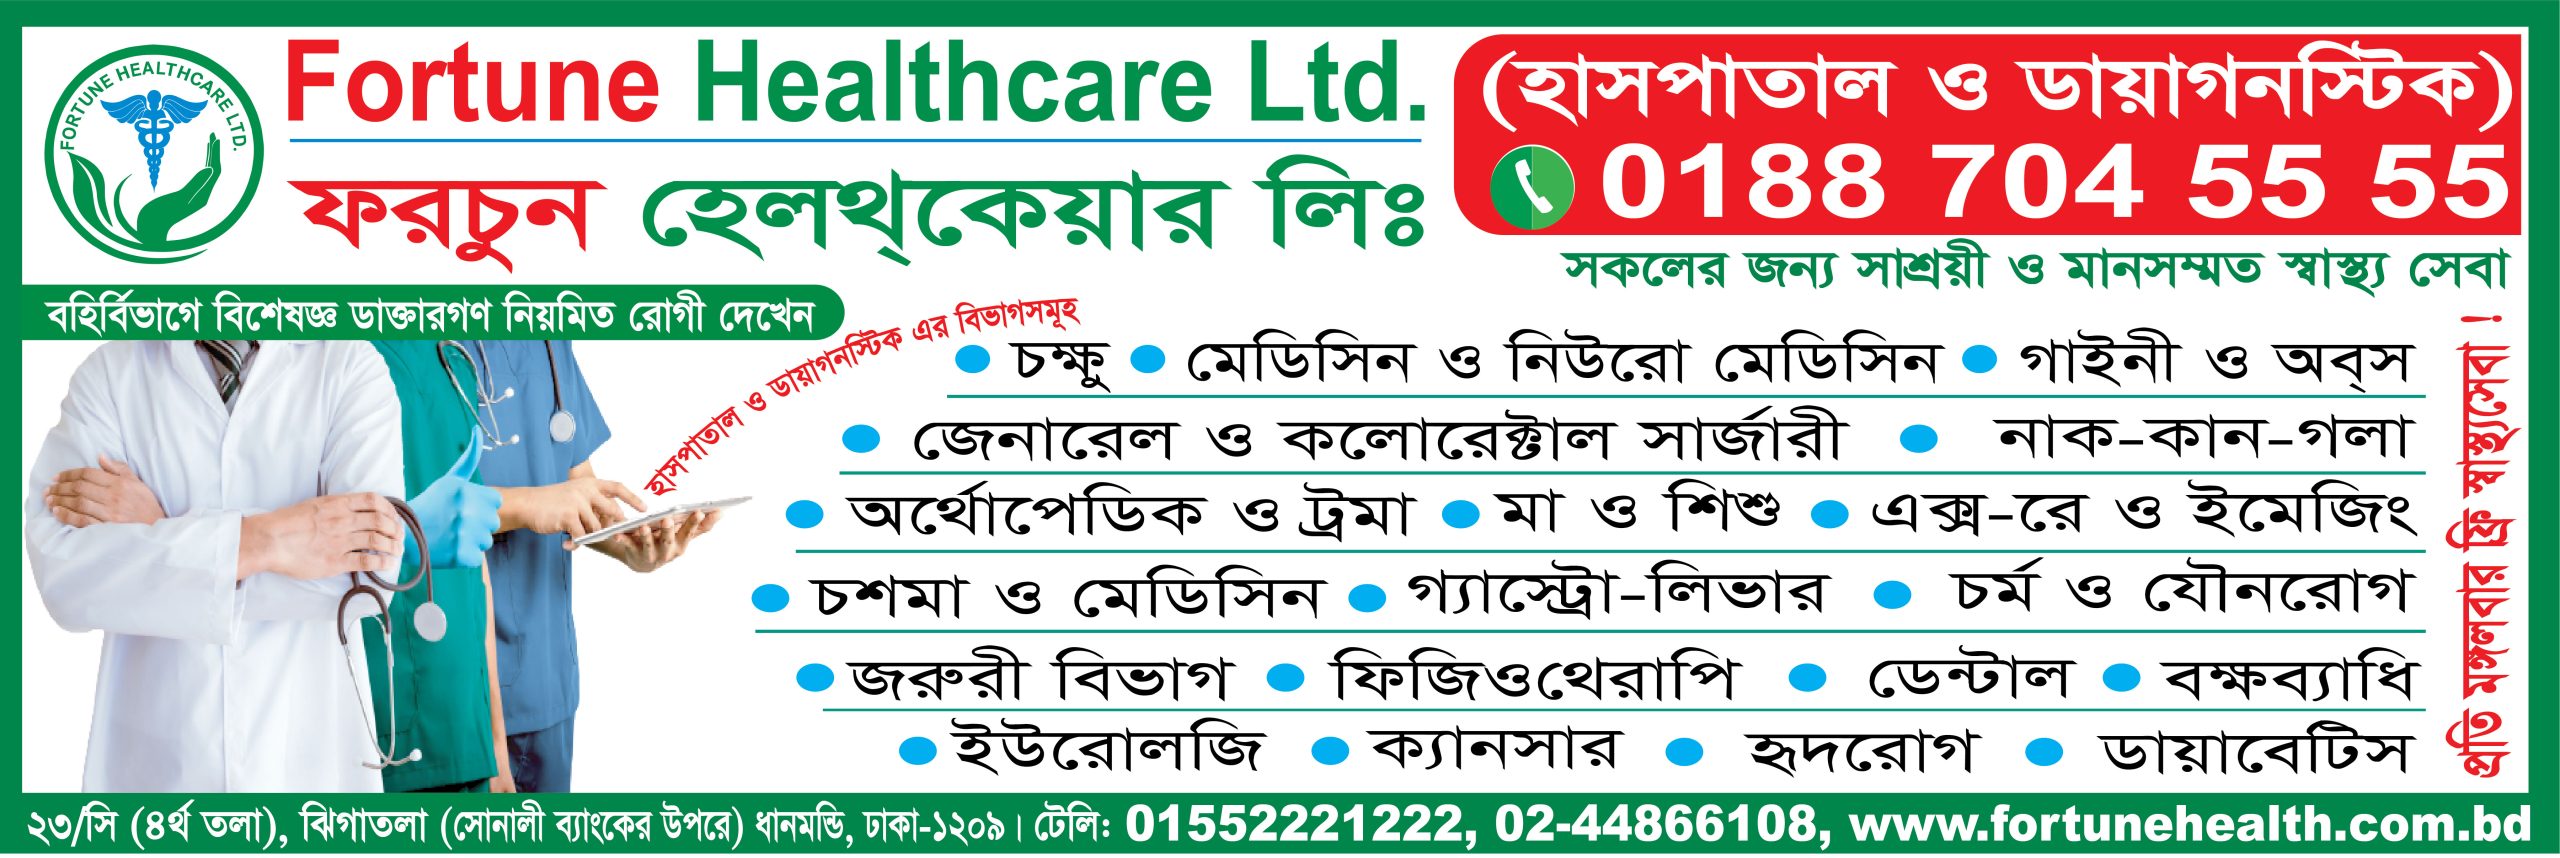 Fortune Healthcare Ltd. offers Hospital Services at affordable prices